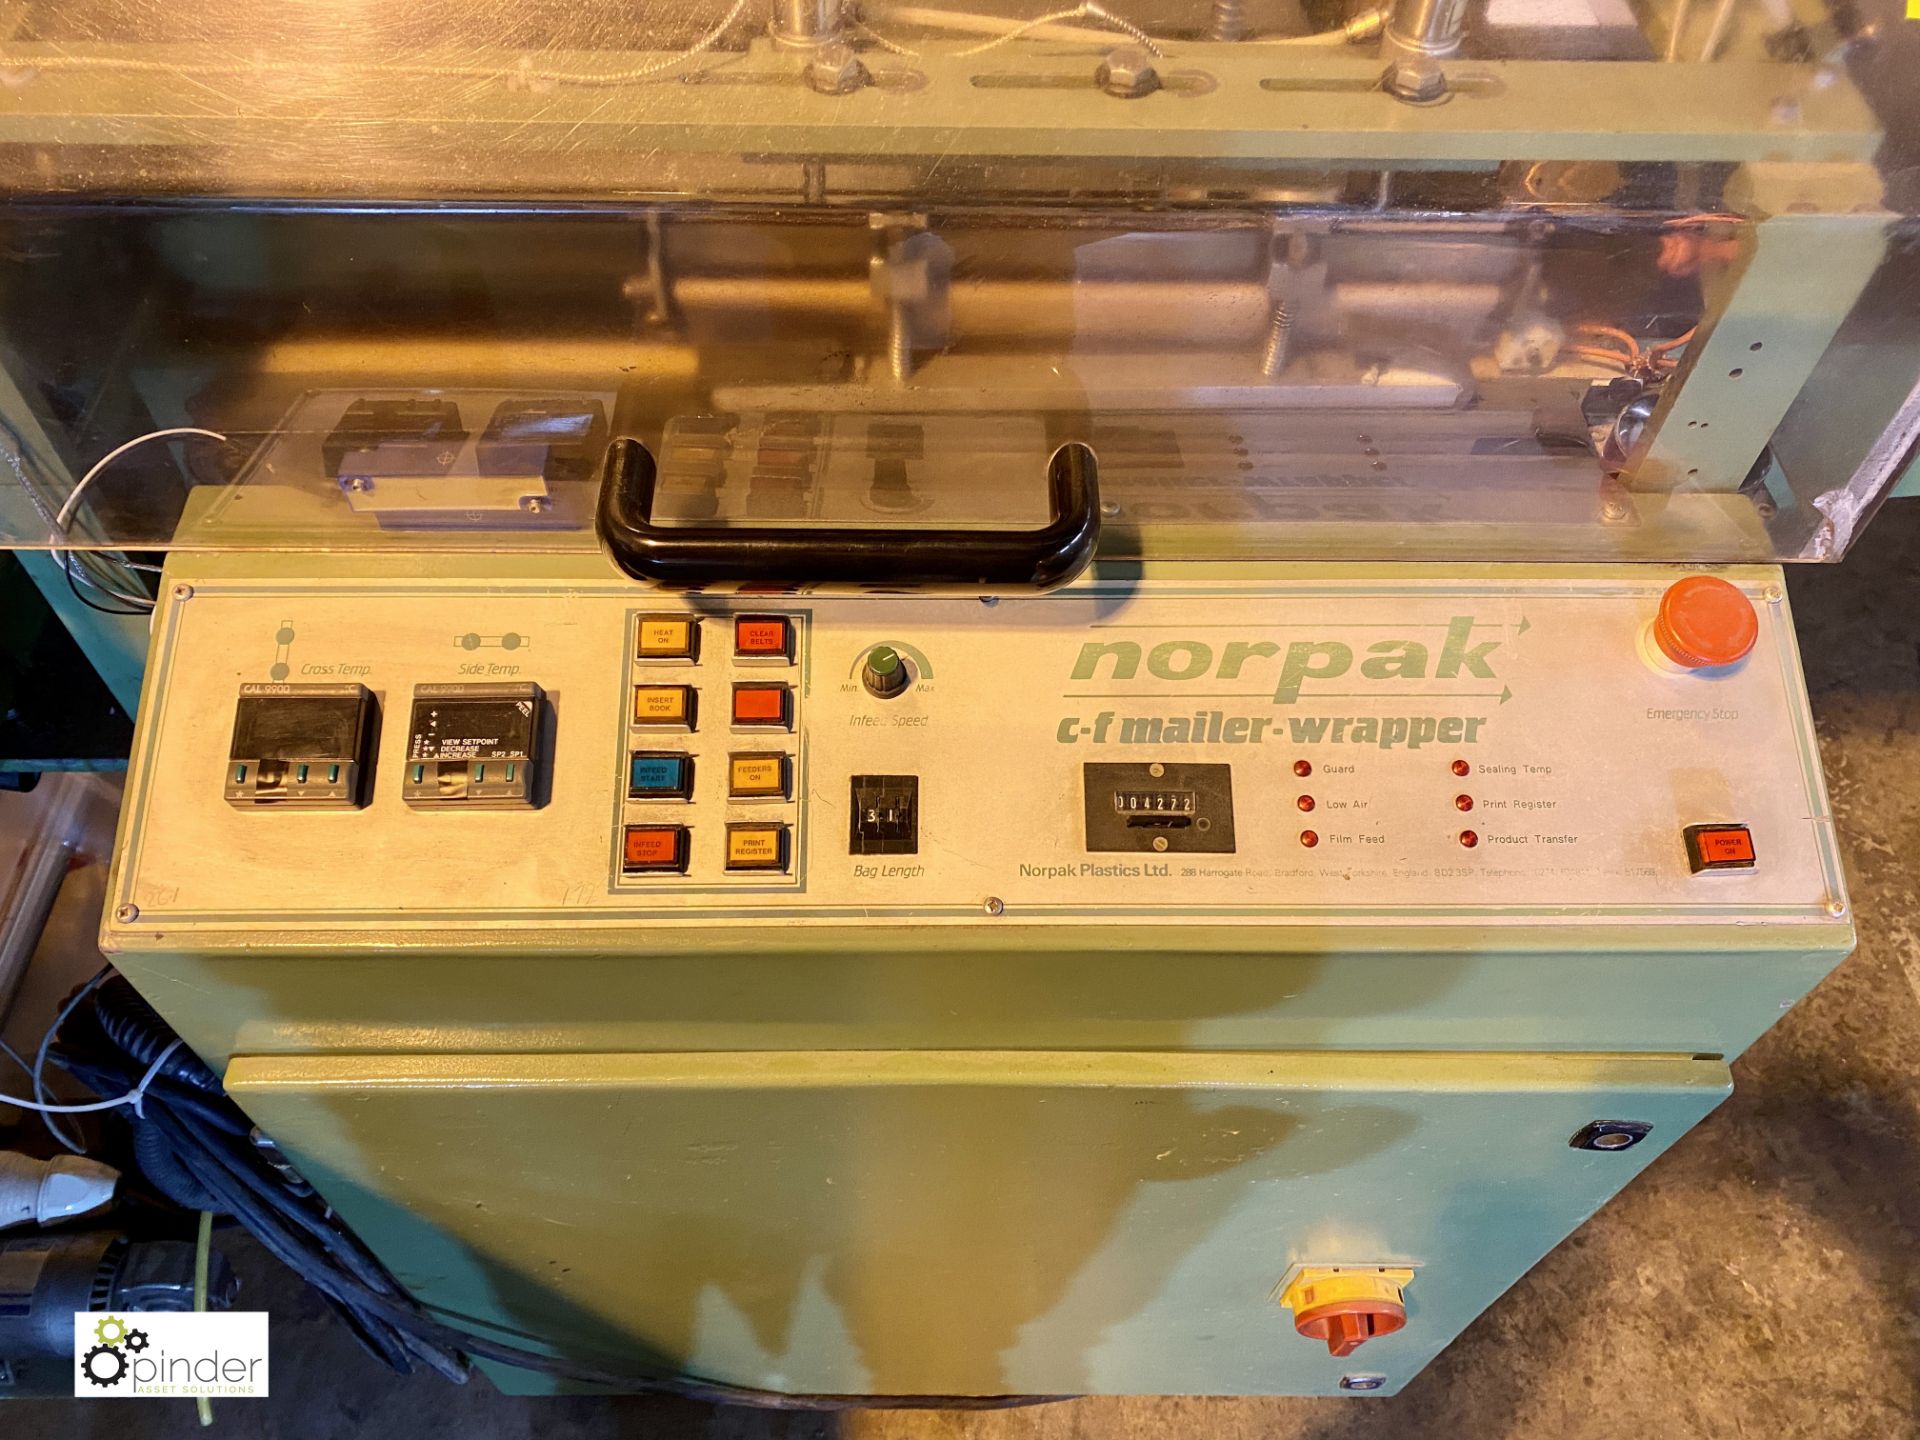 Norpack CF35 Mailer Wrapper, 415volts, serial number 010309R, with quantity spares (please note - Image 7 of 11